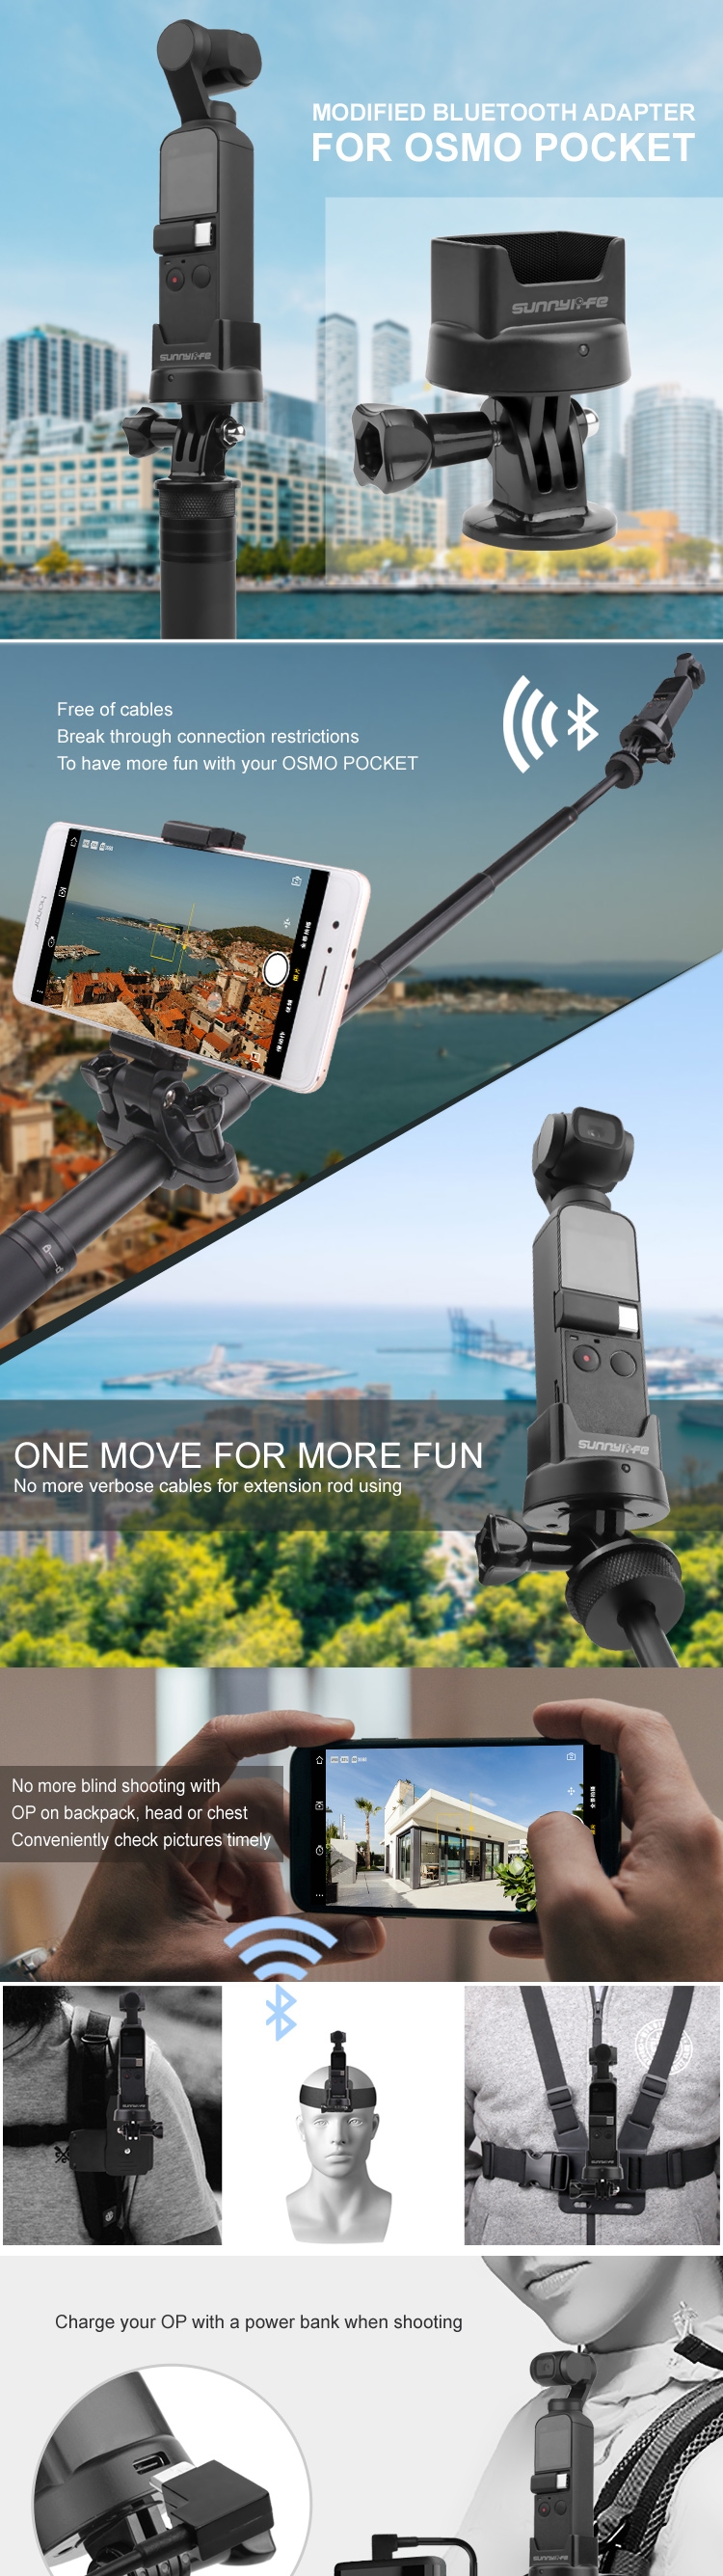 Sunnylife Modified bluetooth Adapter Wireless Connection for DJI OSMO POCKET Gimbal Camera